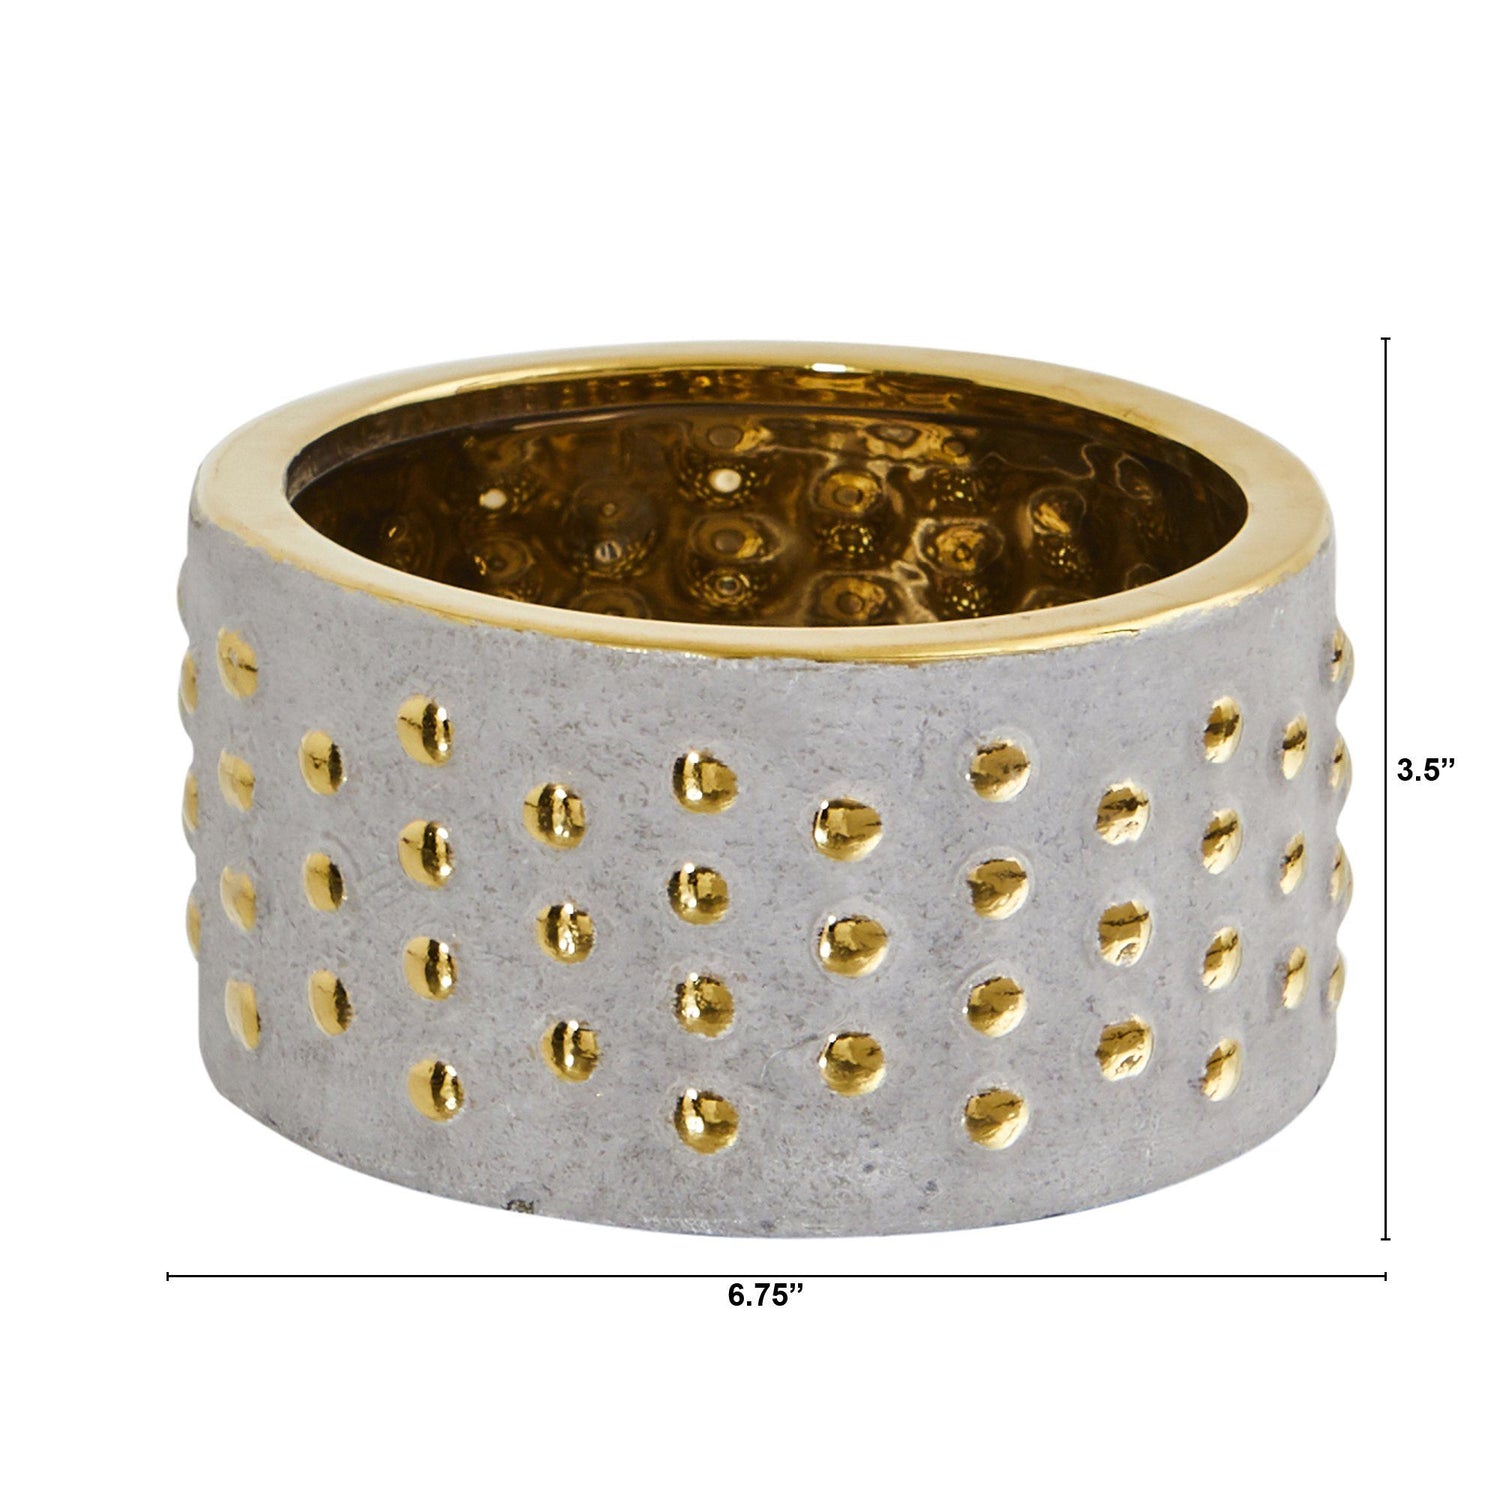 6.75” Regal Stone Hobnail Planter with Gold Accents